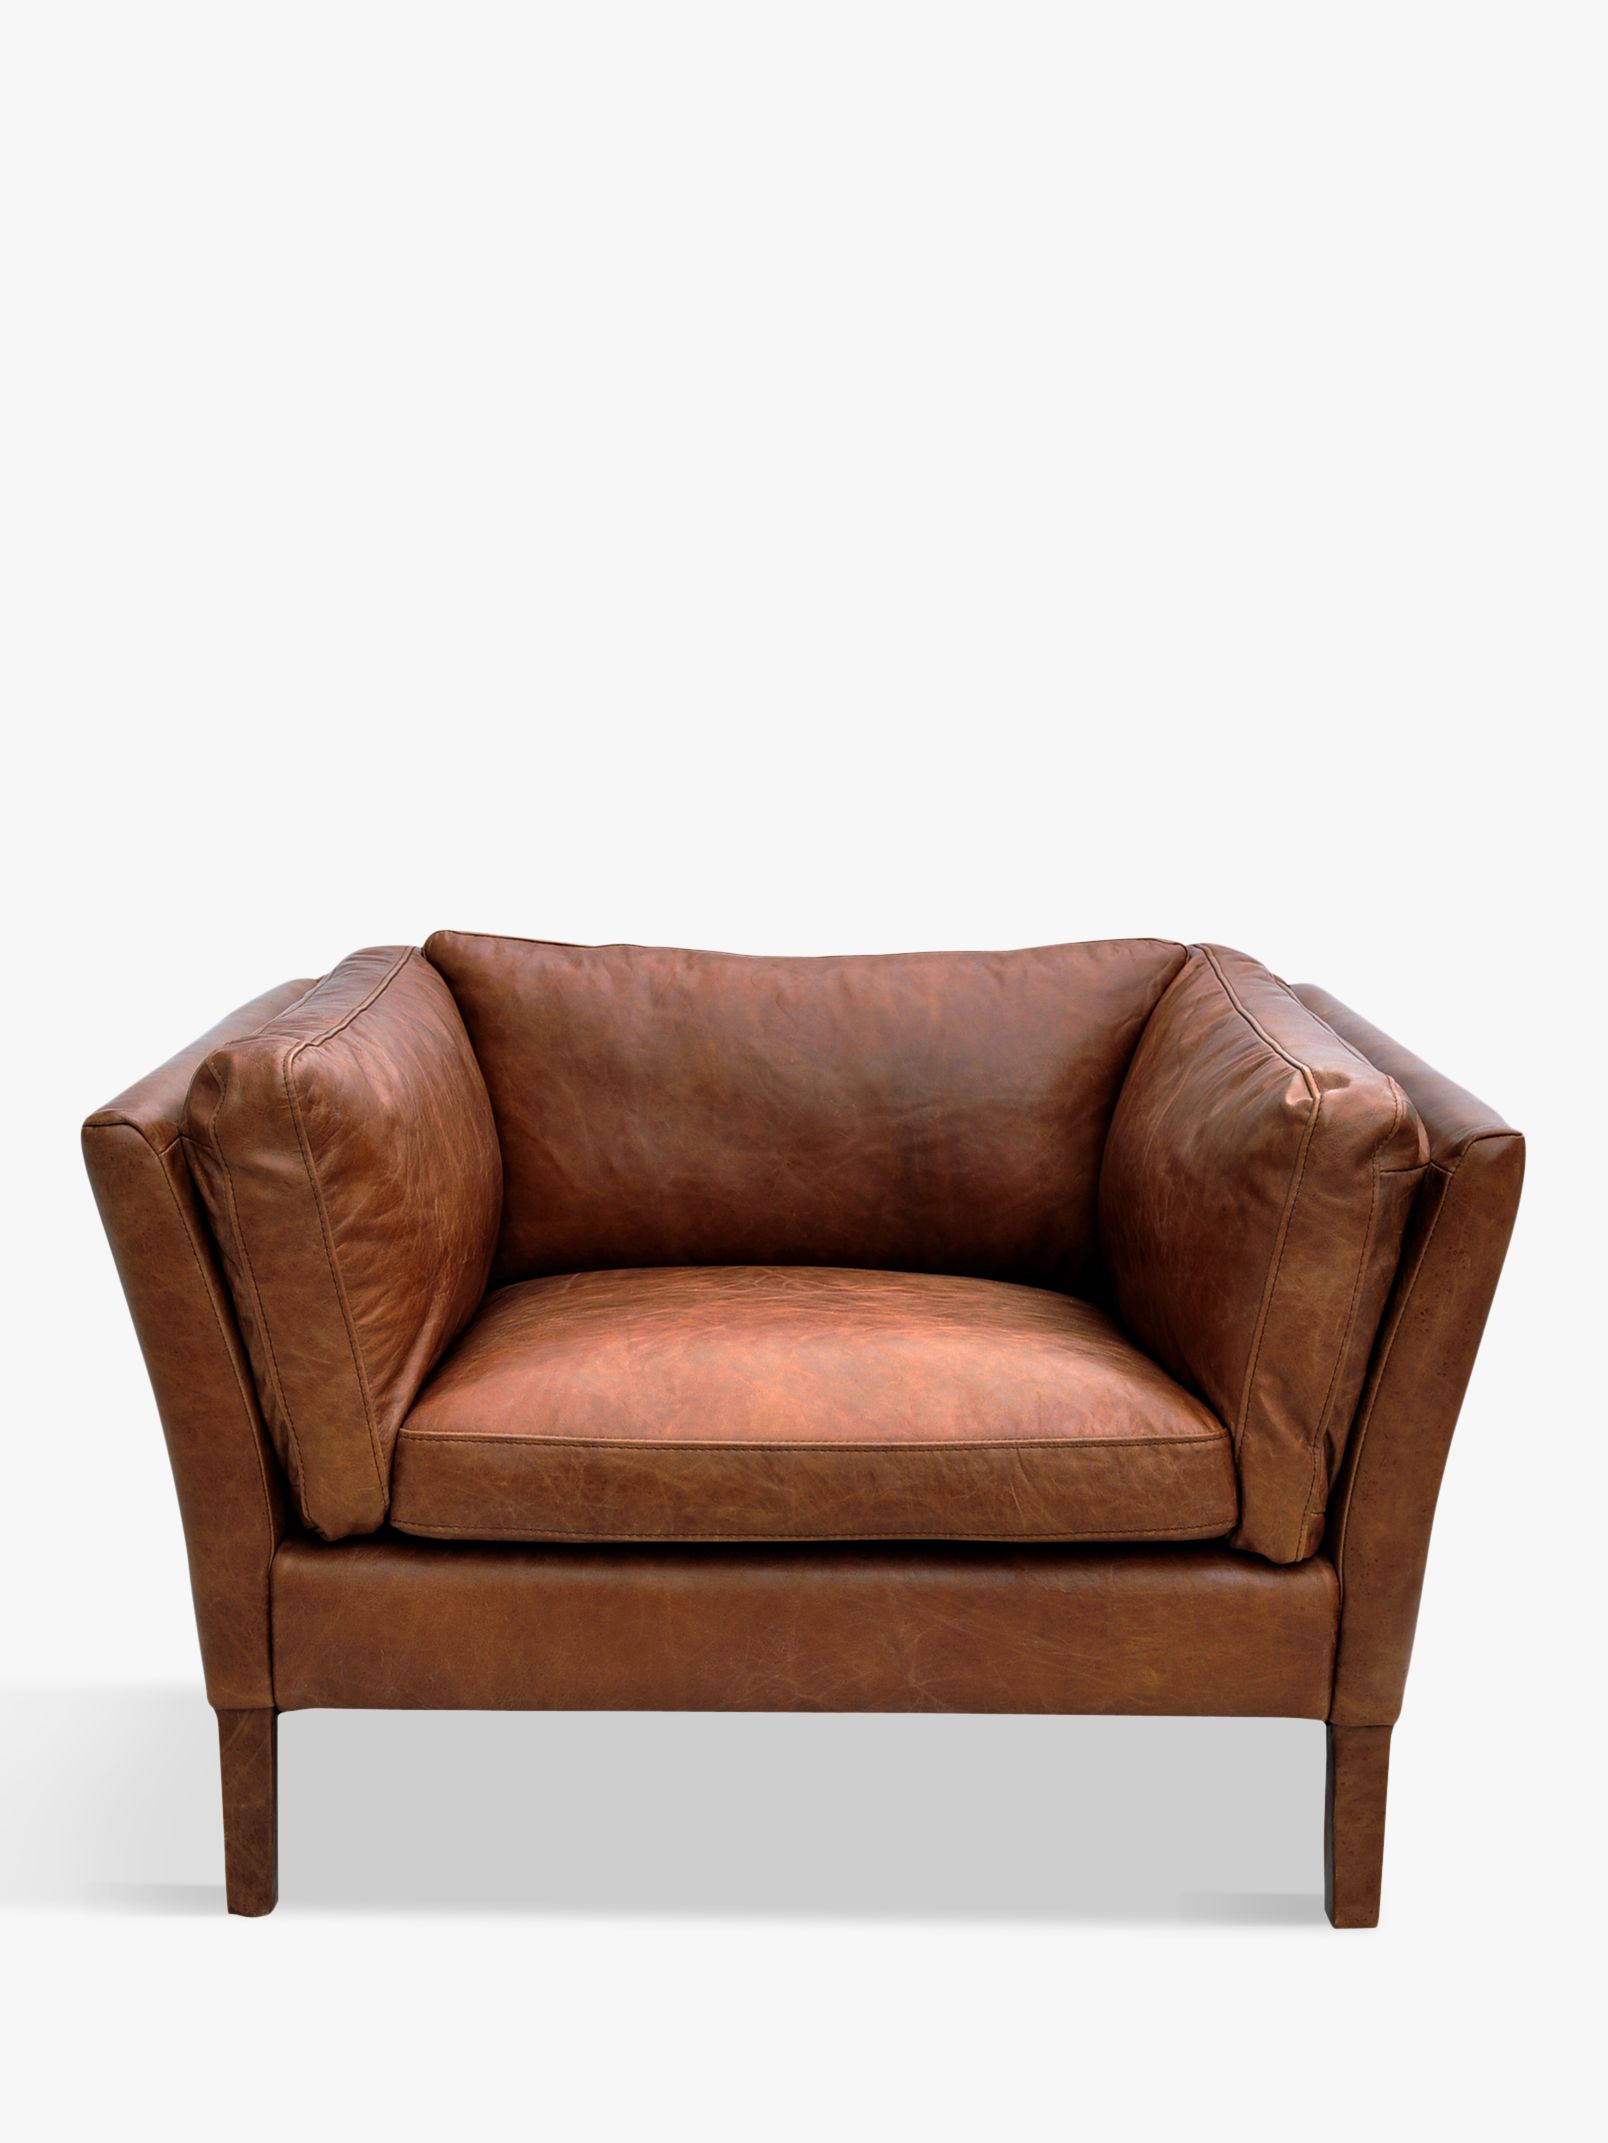 Groucho Range, Halo Groucho Leather Armchair, Antique Whisky